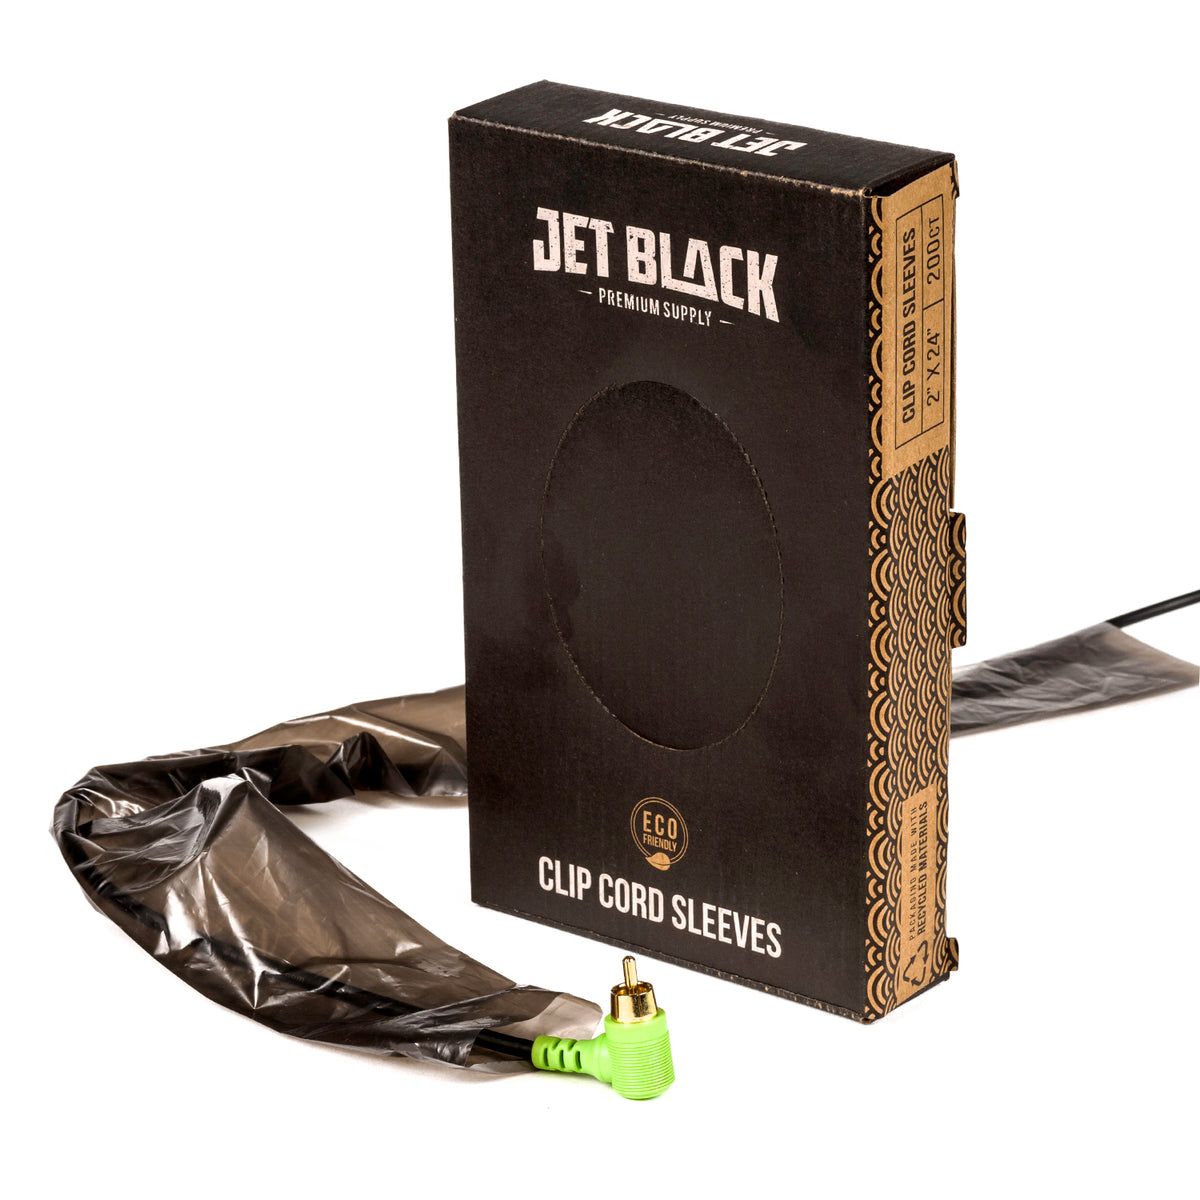 Jet Black Supply - Eco-Friendly Clip Cord Sleeves